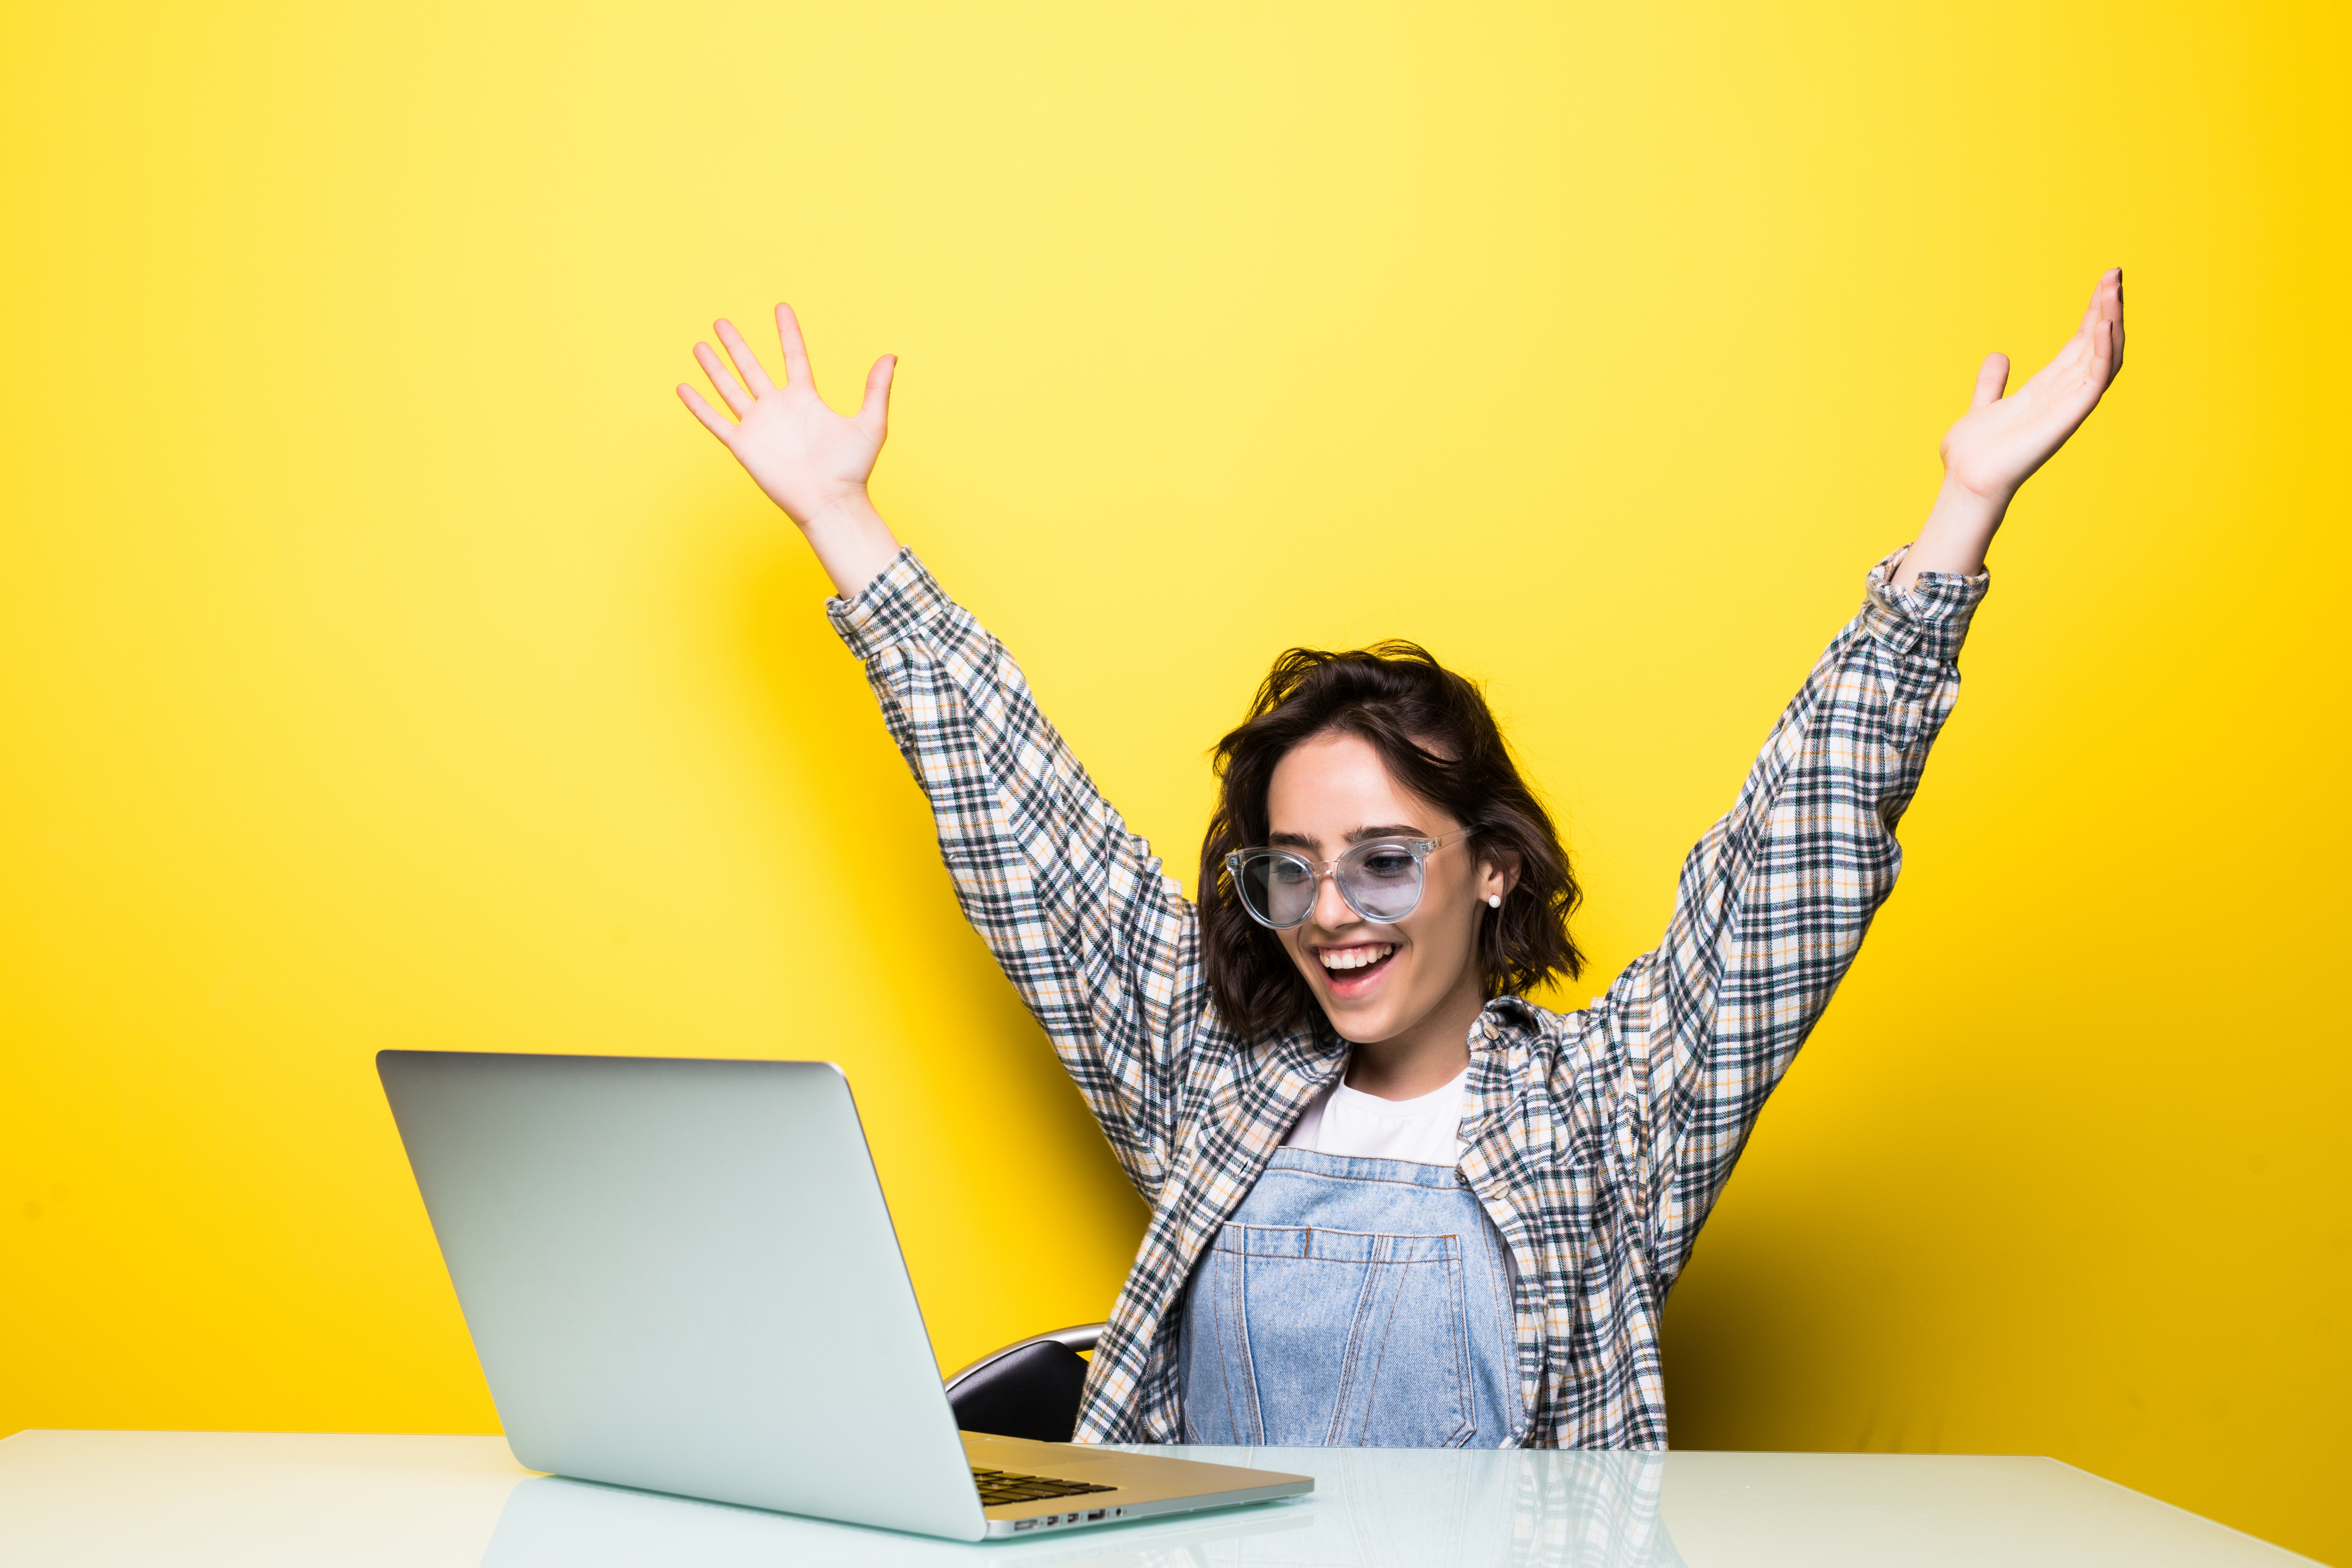 cheerful-pretty-woman-glasses-holding-laptop-showing-fist-up-excited-with-win